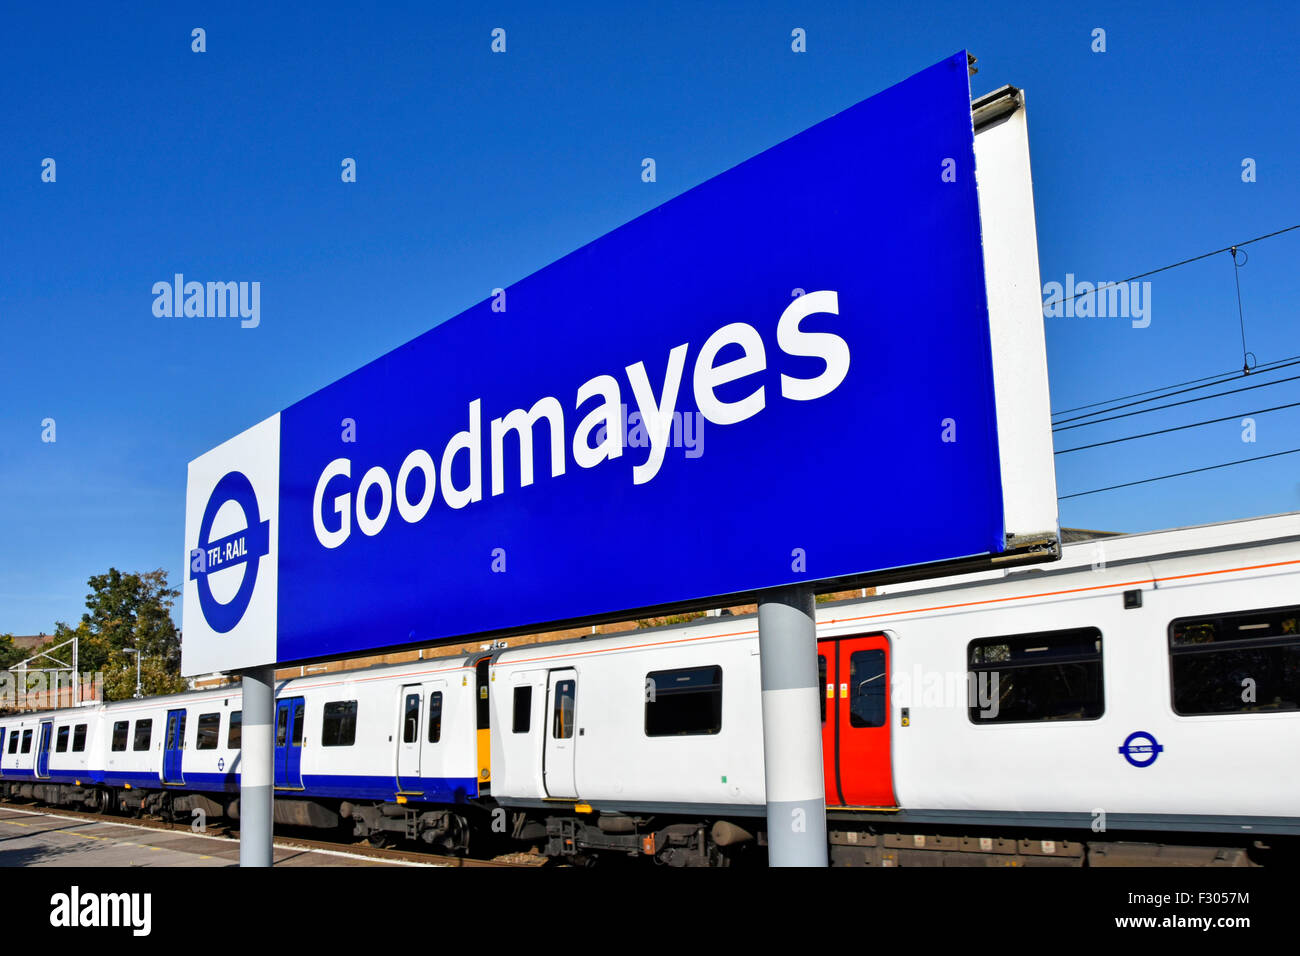 New 2015 London suburban station blue signage by TFL prior to changes to the Elizabeth Line when crossrail begins operating & stopping at Goodmayes Stock Photo